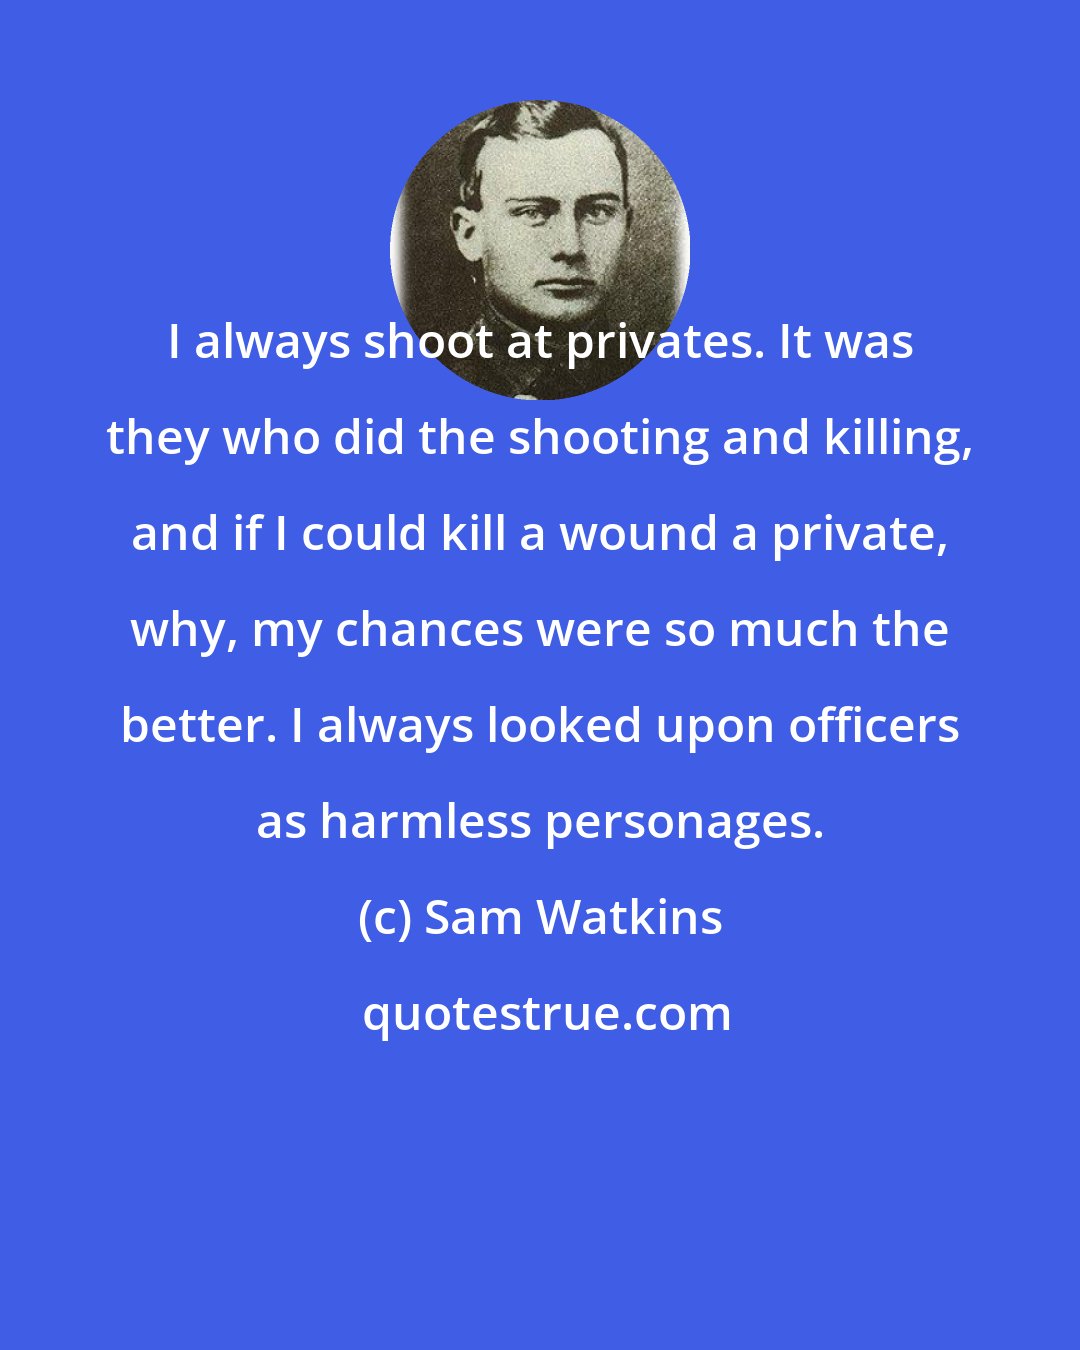 Sam Watkins: I always shoot at privates. It was they who did the shooting and killing, and if I could kill a wound a private, why, my chances were so much the better. I always looked upon officers as harmless personages.